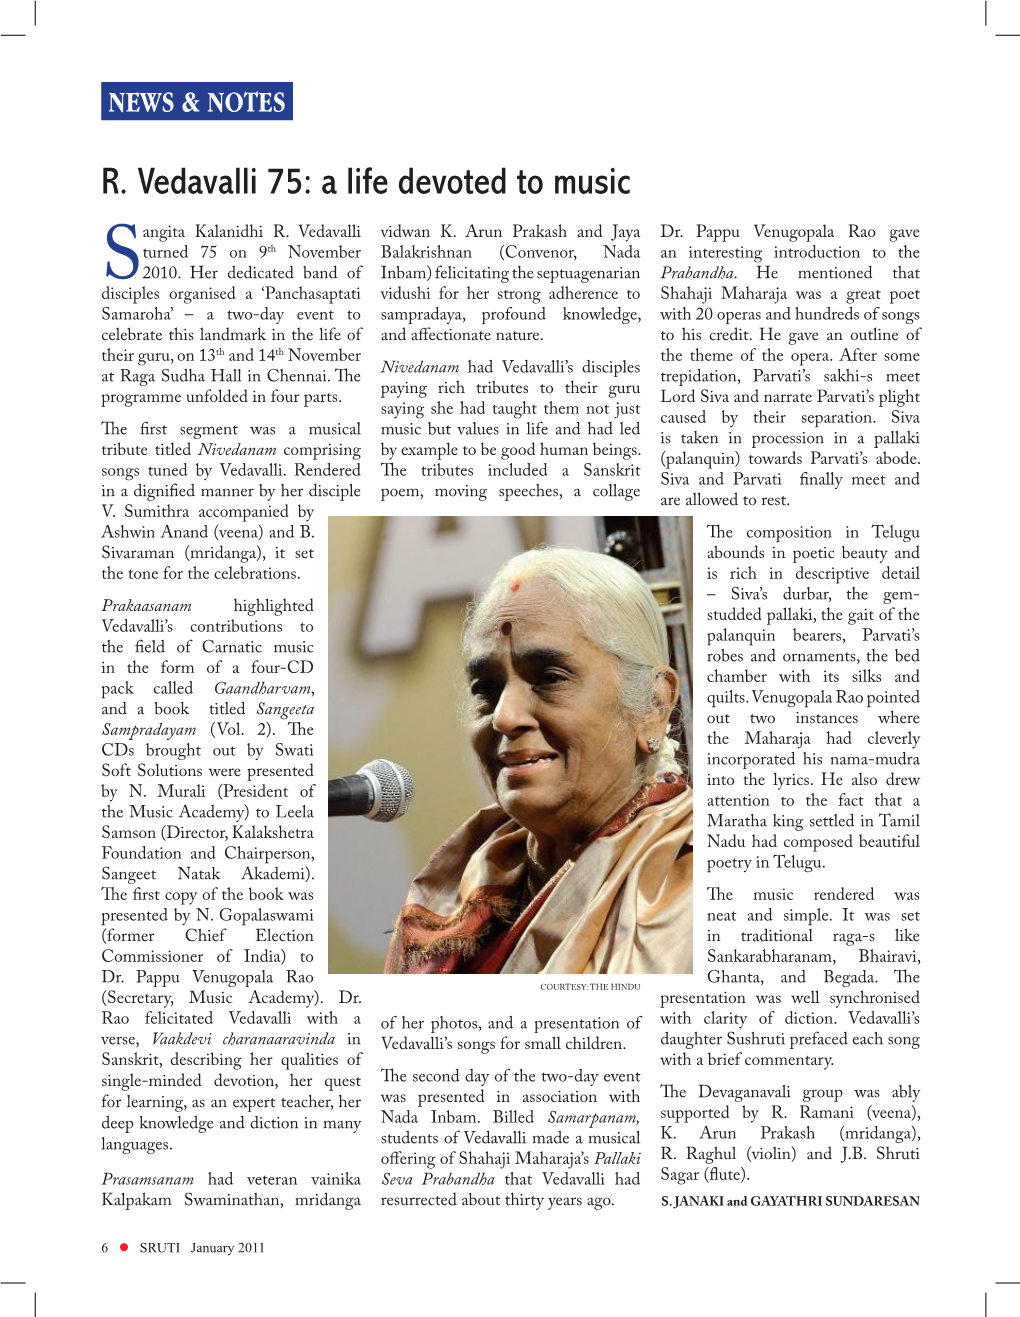 R. Vedavalli 75: a Life Devoted to Music